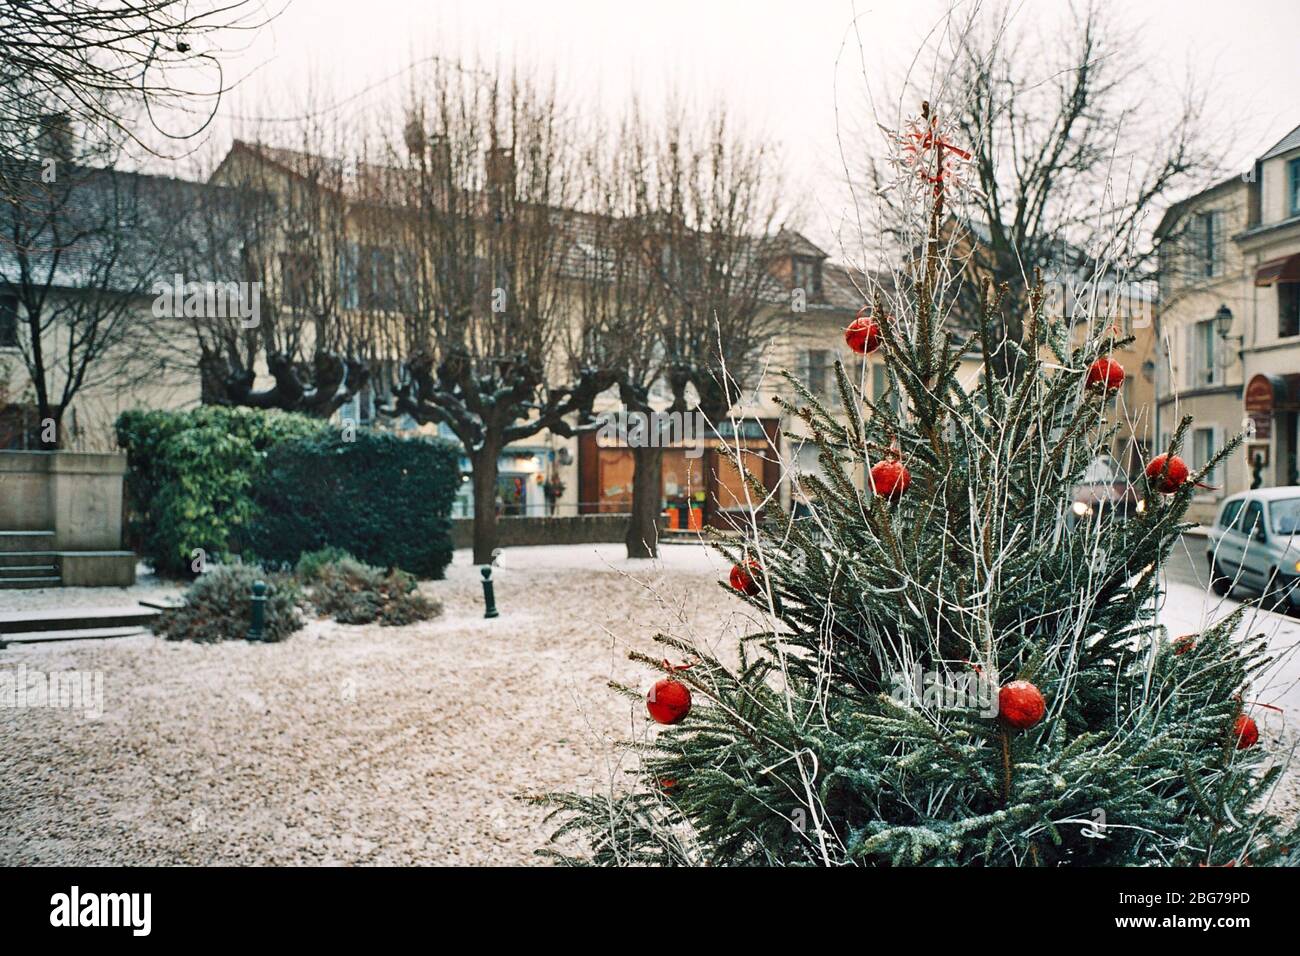 AJAXNETPHOTO.  LOUVECIENNES, FRANCE. - CHRISTMAS SCENE - LIGHT DUSTING OF SNOW IN THE VILLAGE SQUARE, LOCATION ONCE FREQUENTED BY 19TH CENTURY ARTISTS INCLUDING CAMILLE PISSARRO AND ALFRED SISLEY.PHOTO:JONATHAN EASTLAND/AJAX REF:TC2587 19 18A Stock Photo